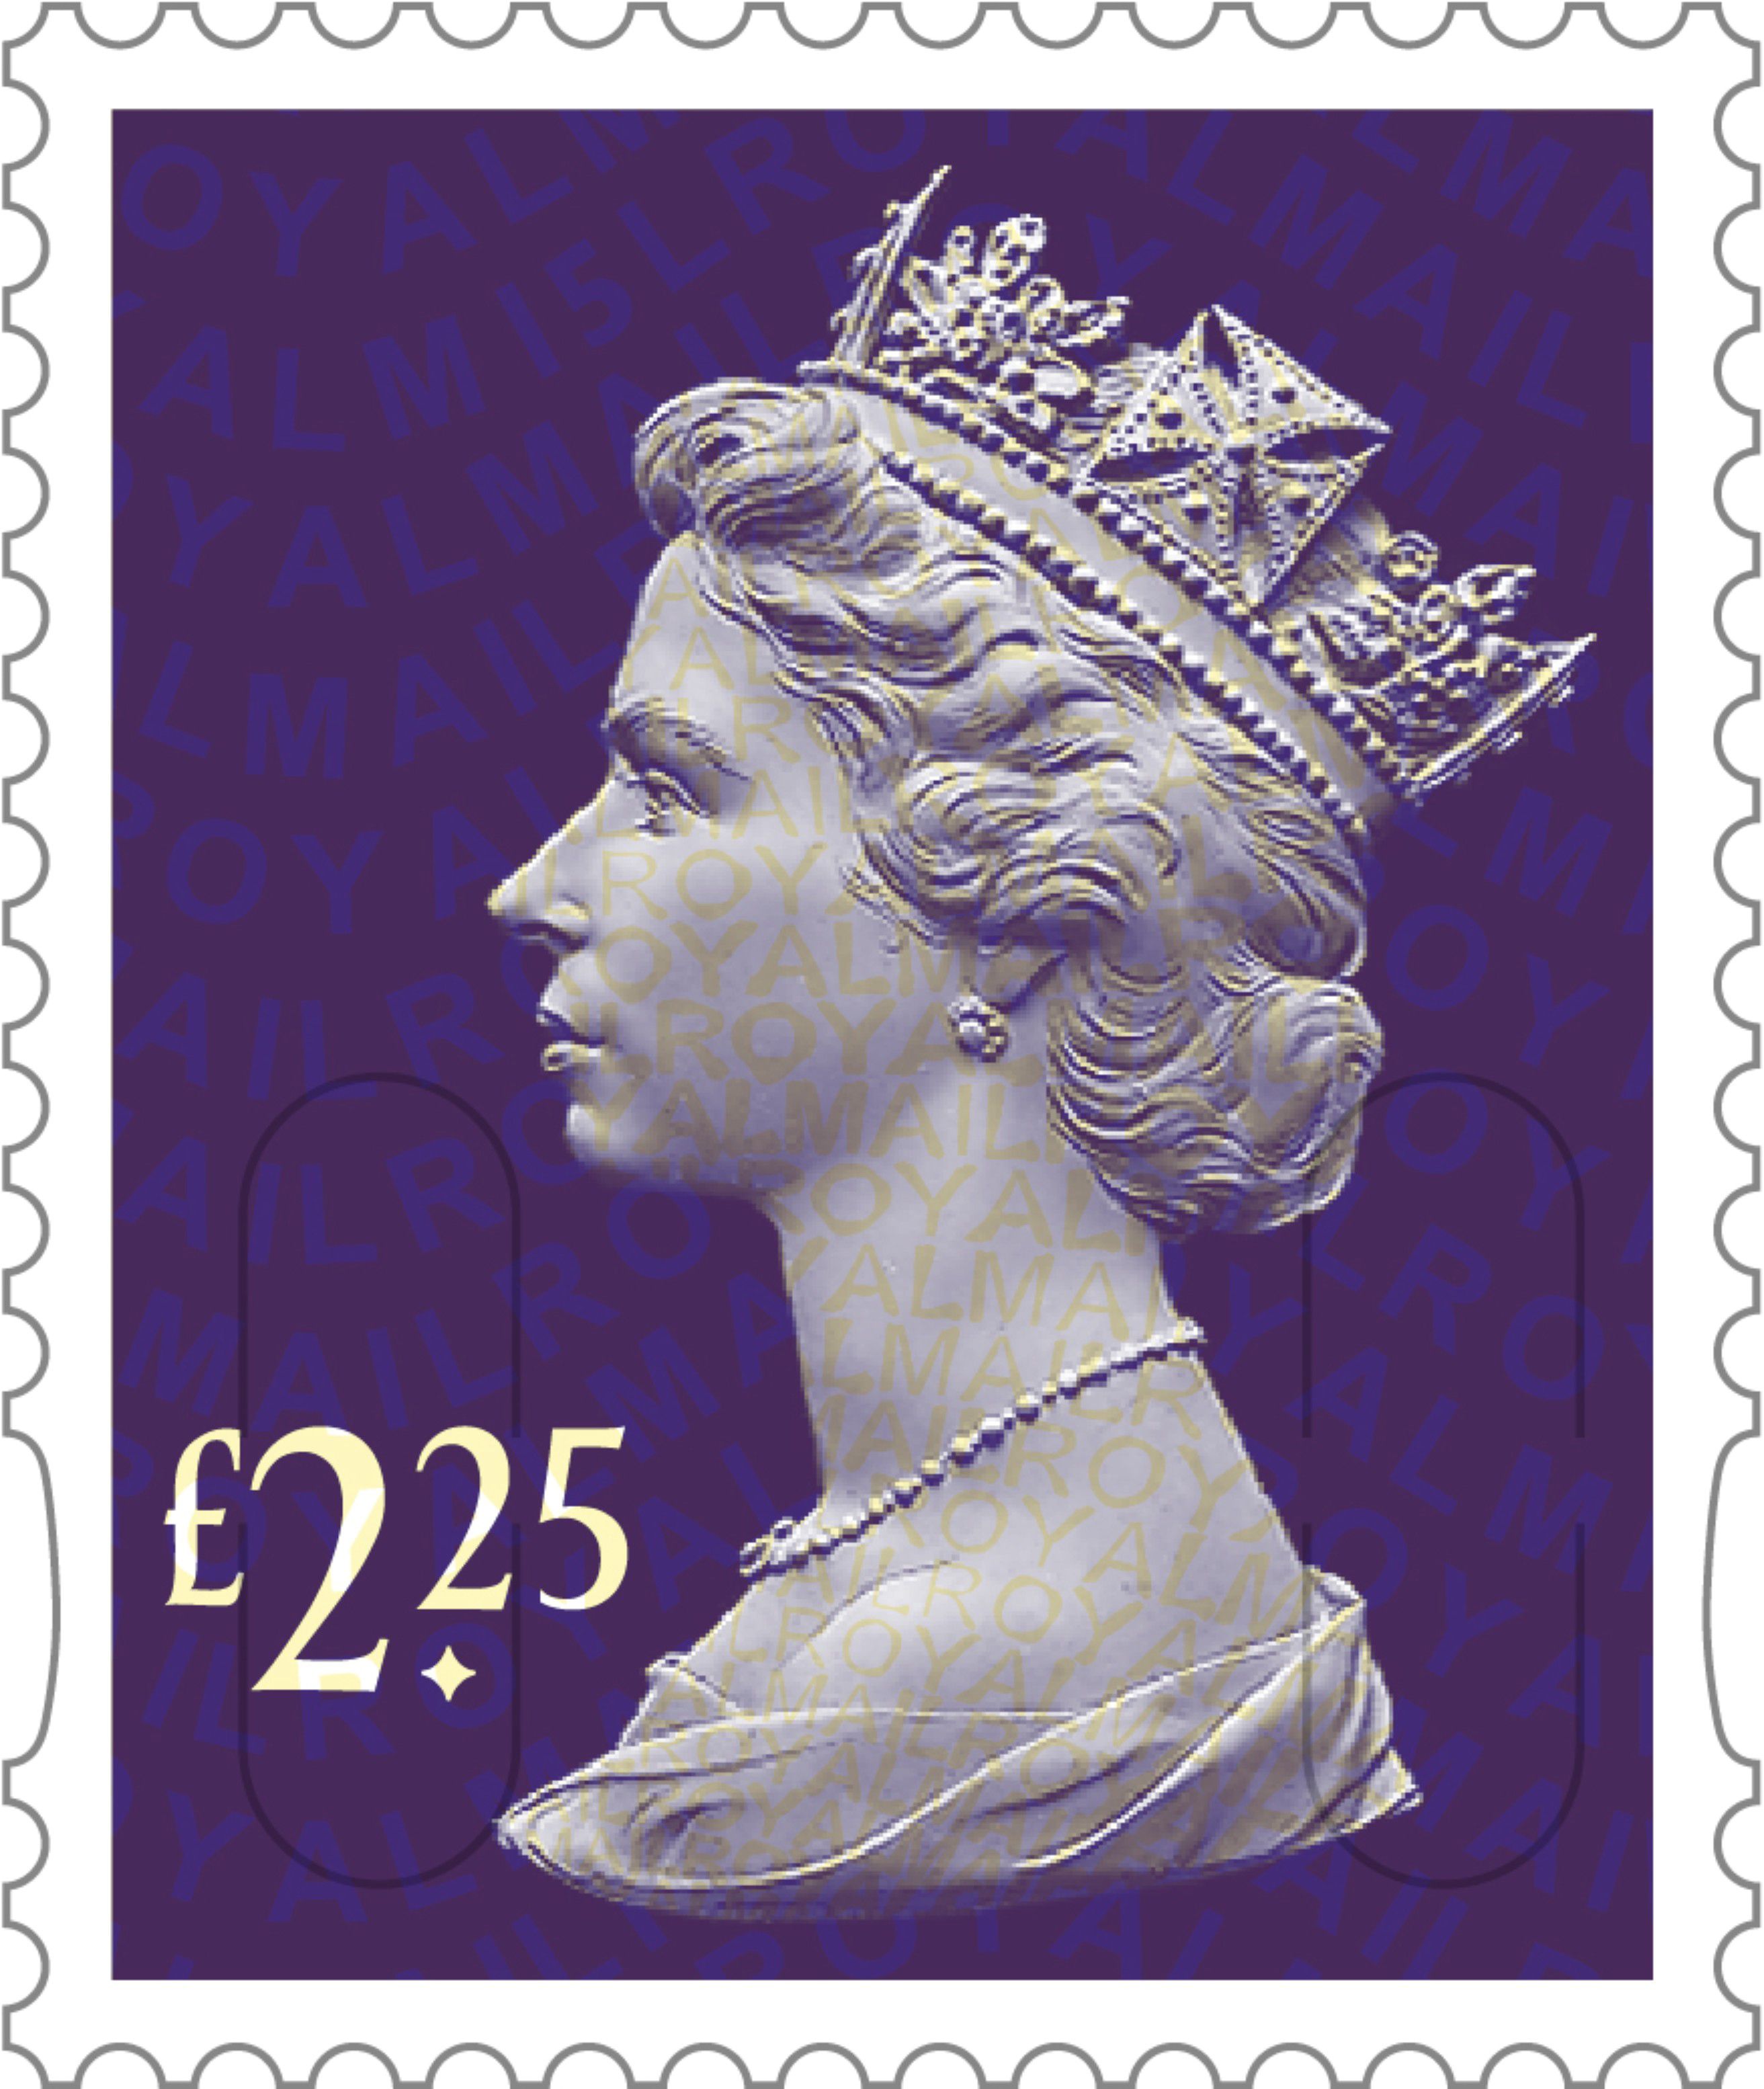 Definitives 2015 £2.25 Stamp (2015) Plum Purple | Stamps: Great ...